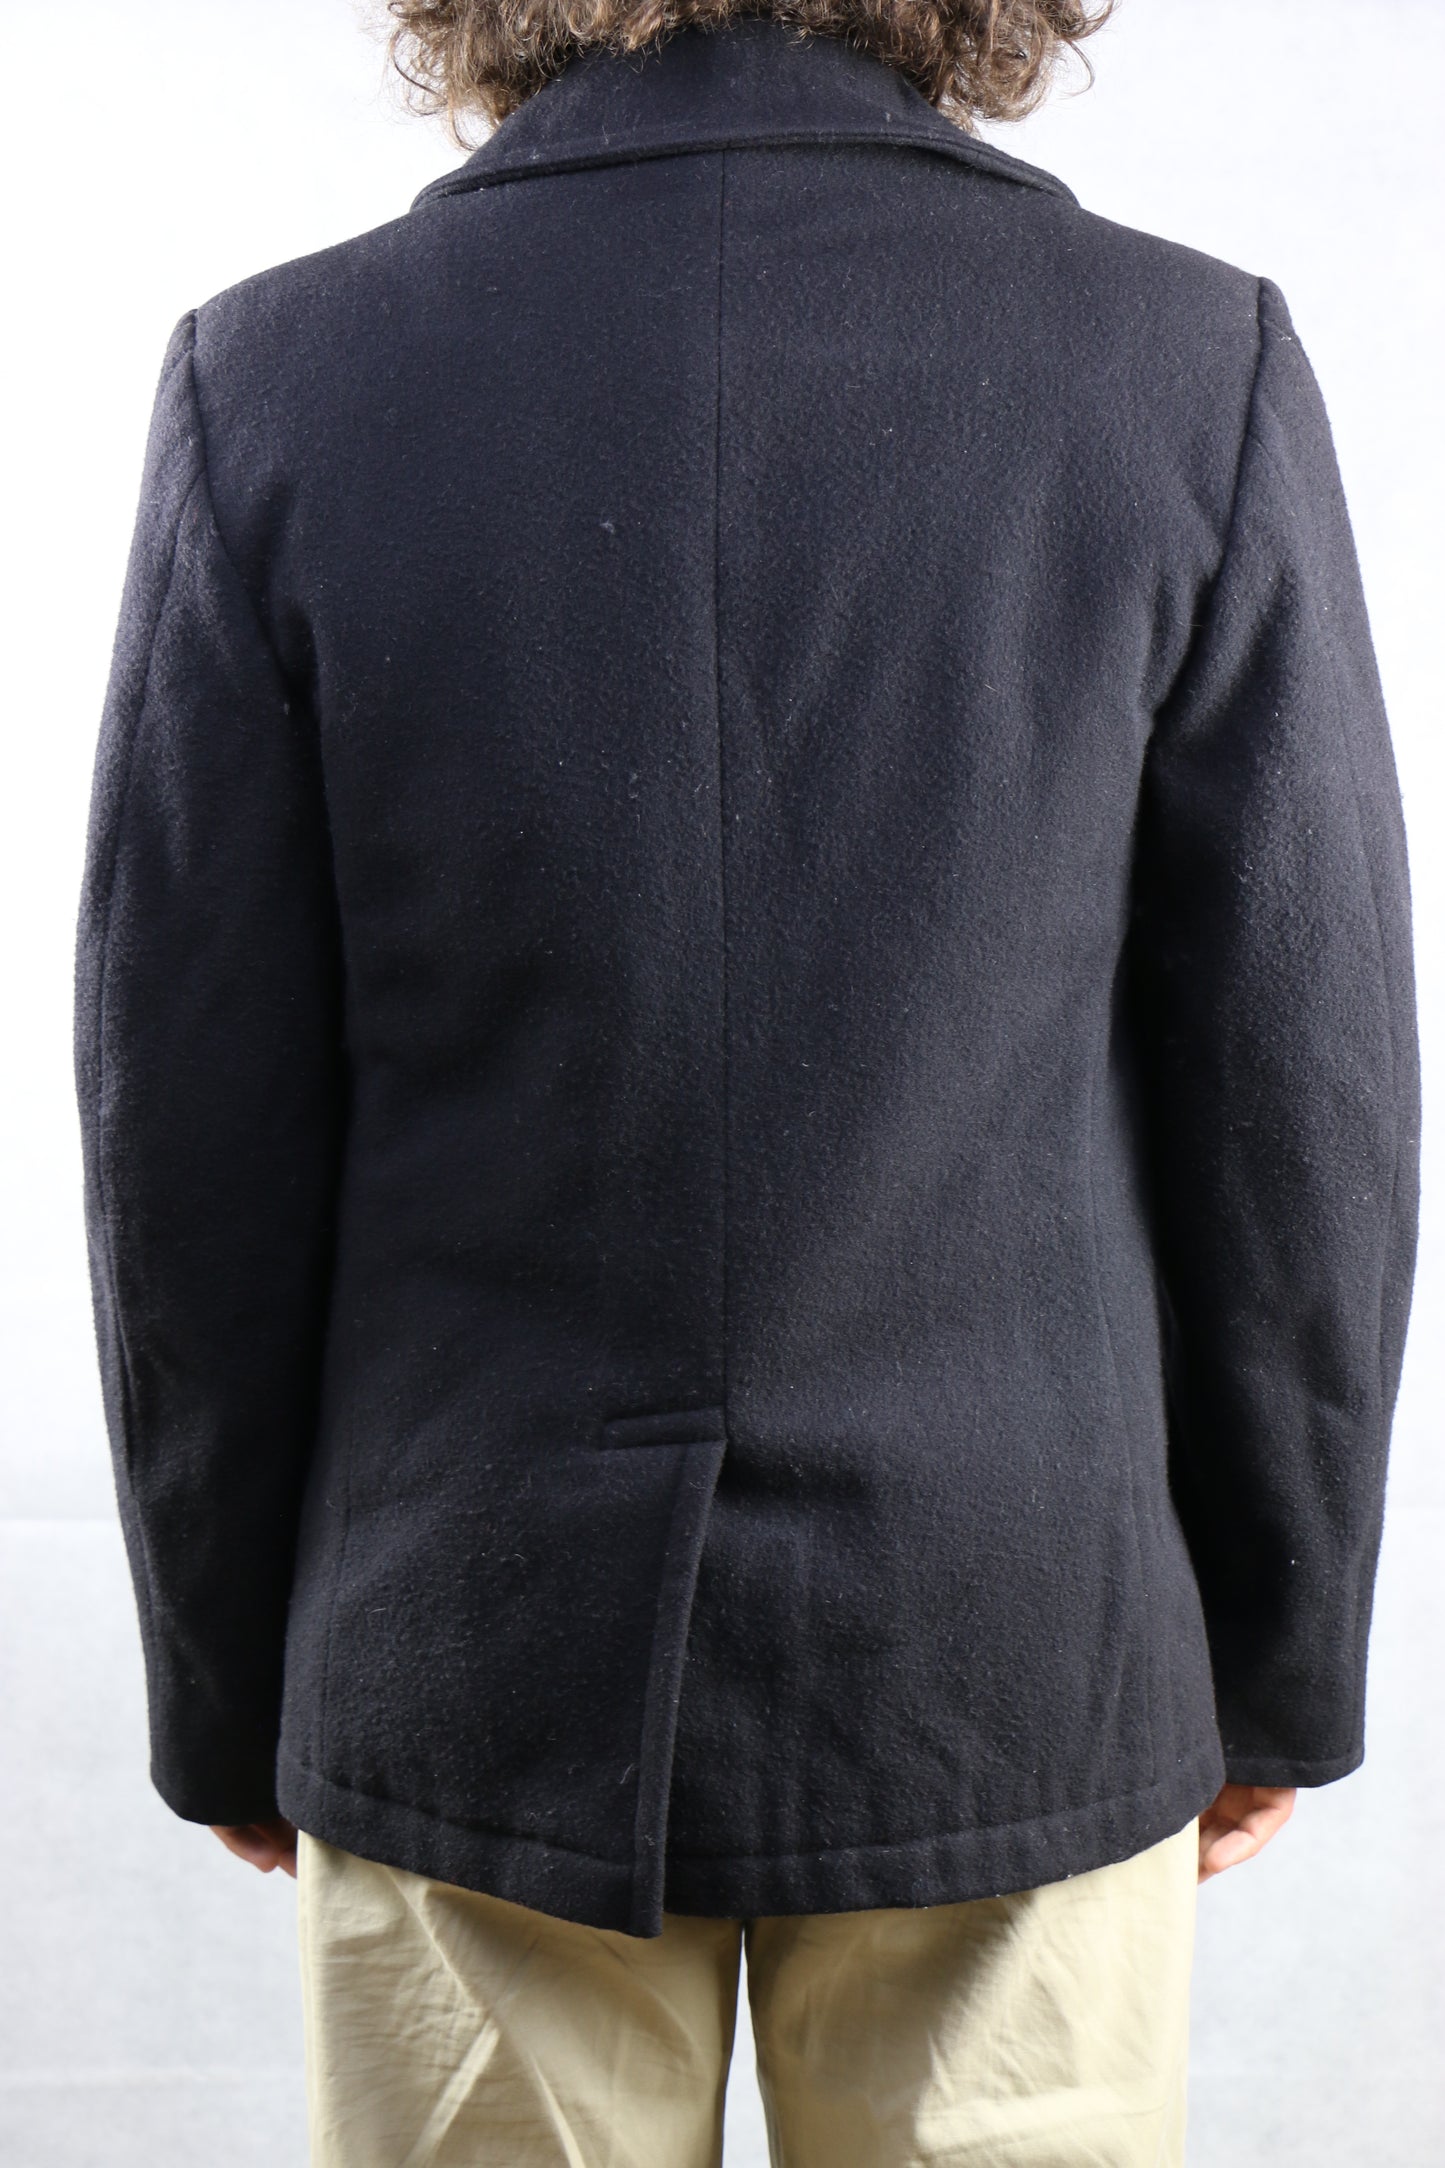 Peacoat 8 Buttons - vintage clothing clochard92.com